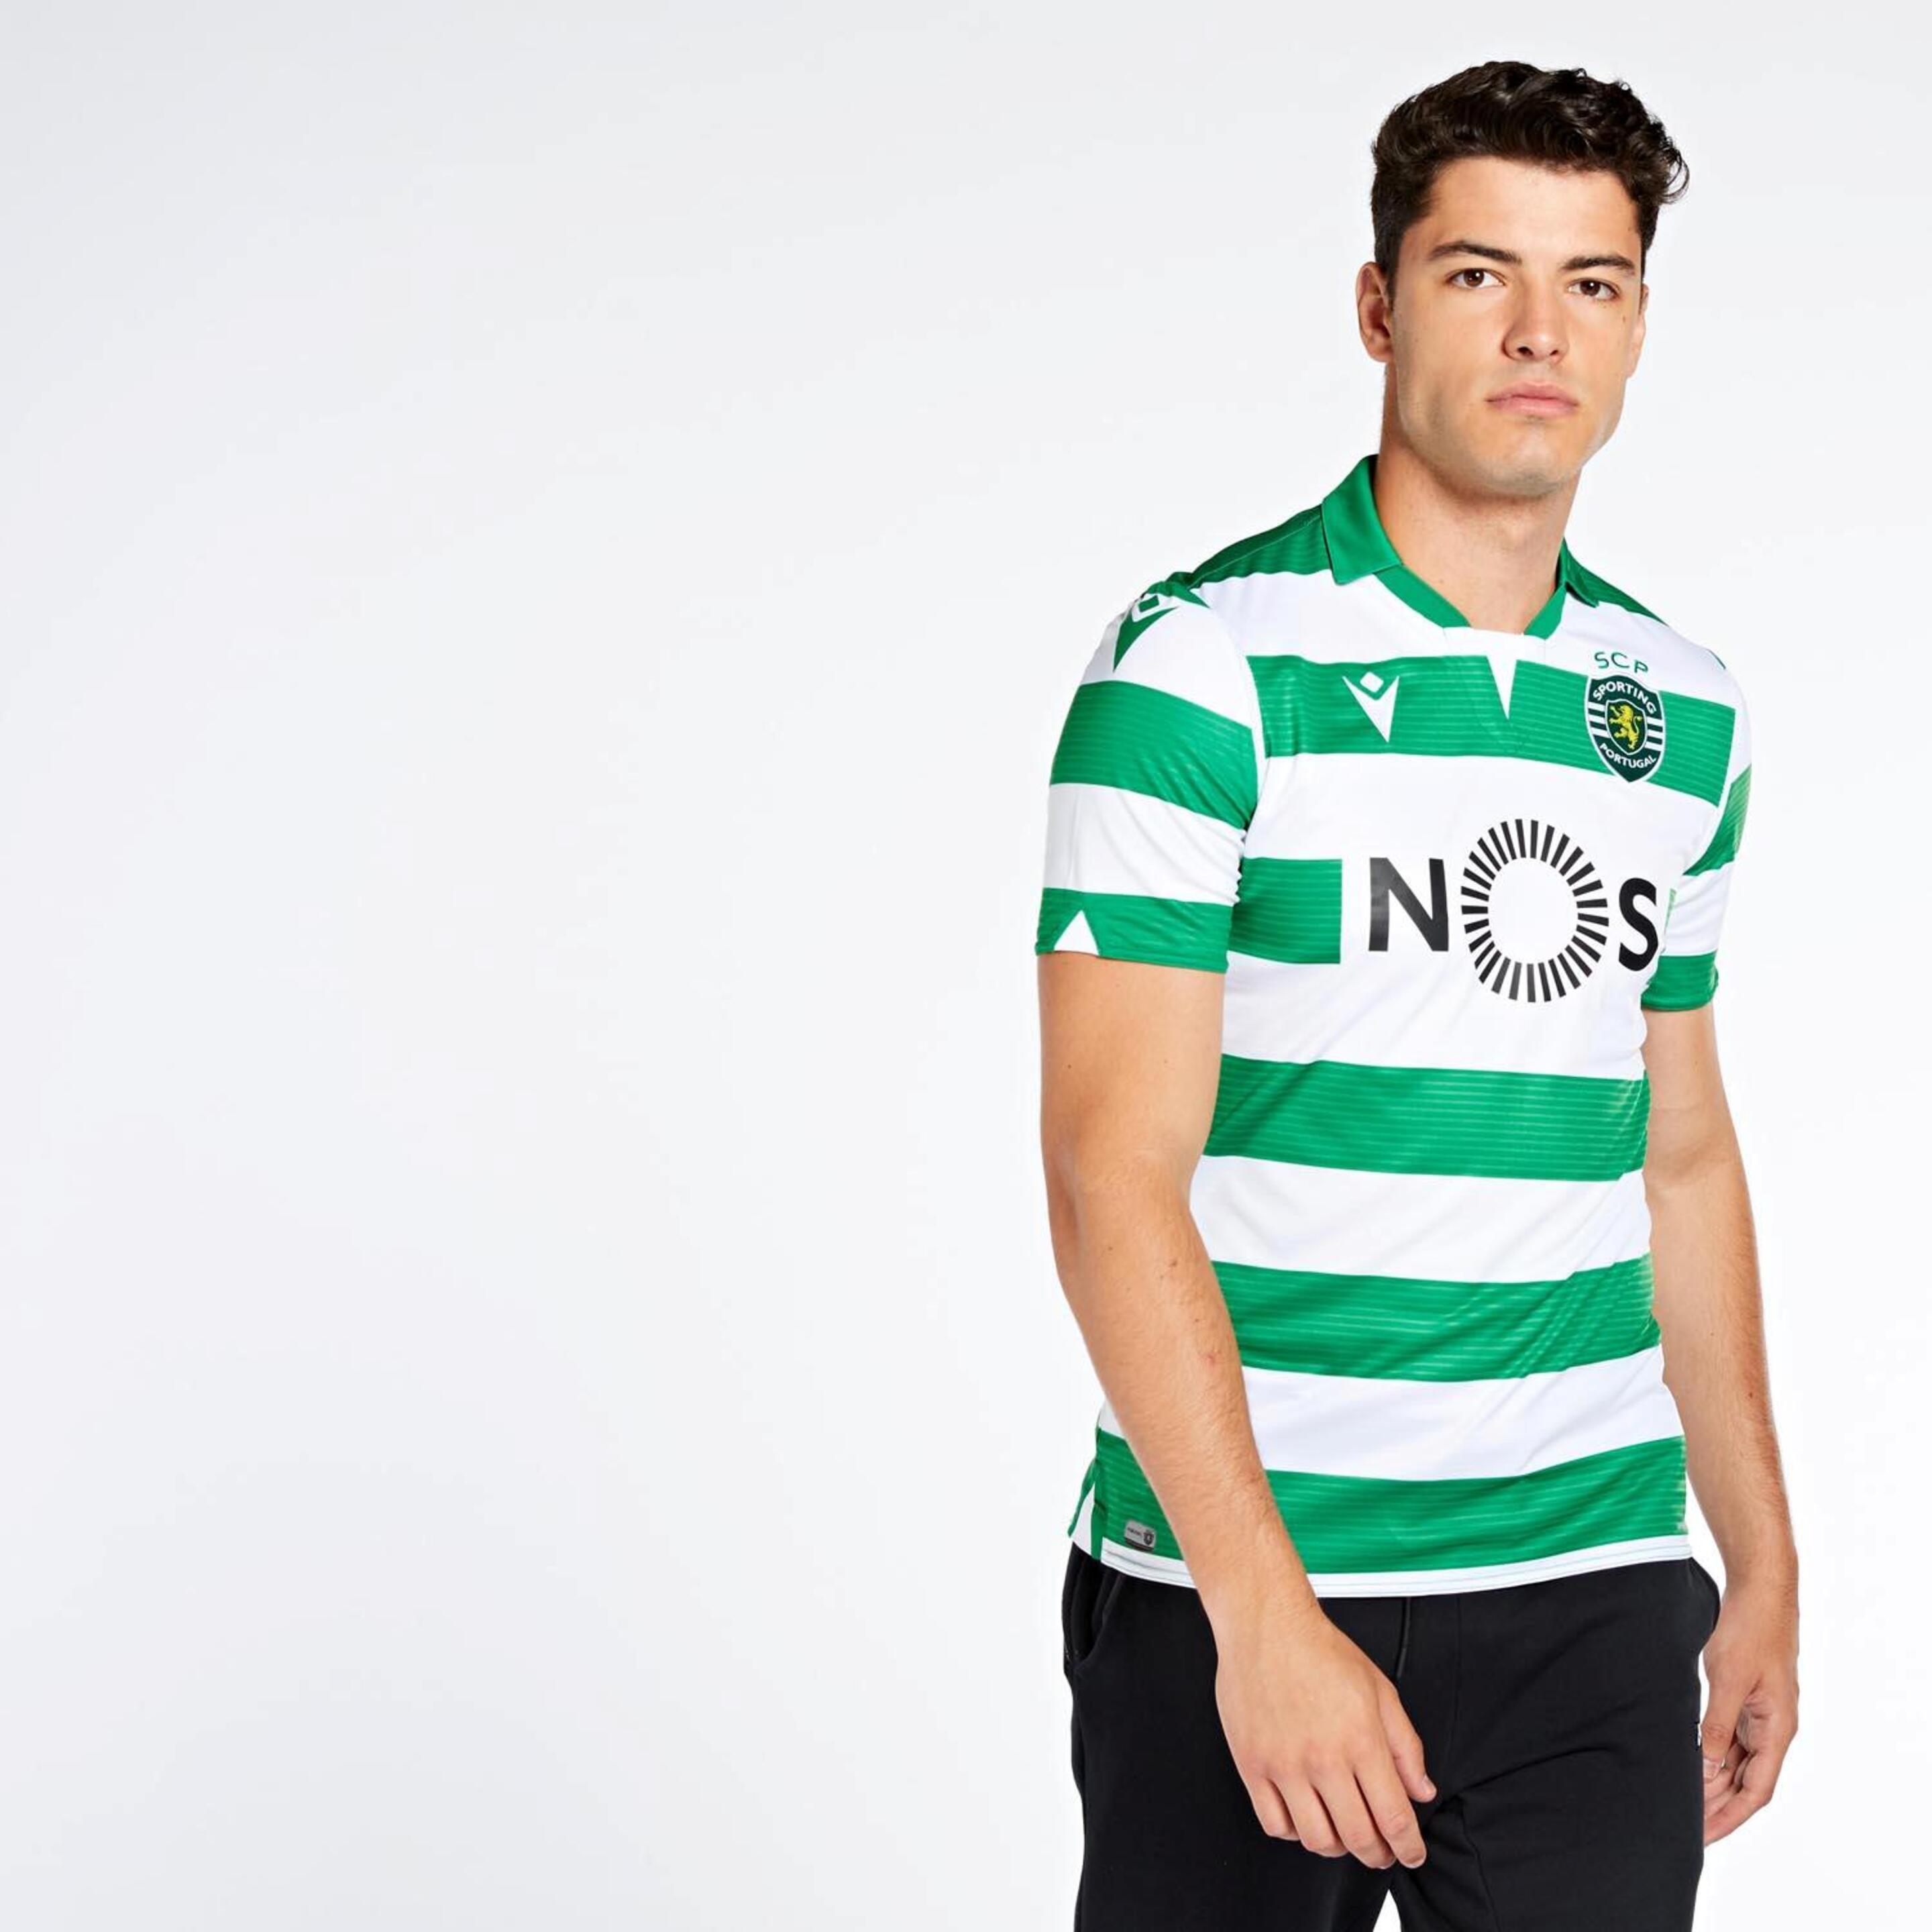 Camisola Sporting Cp Macron